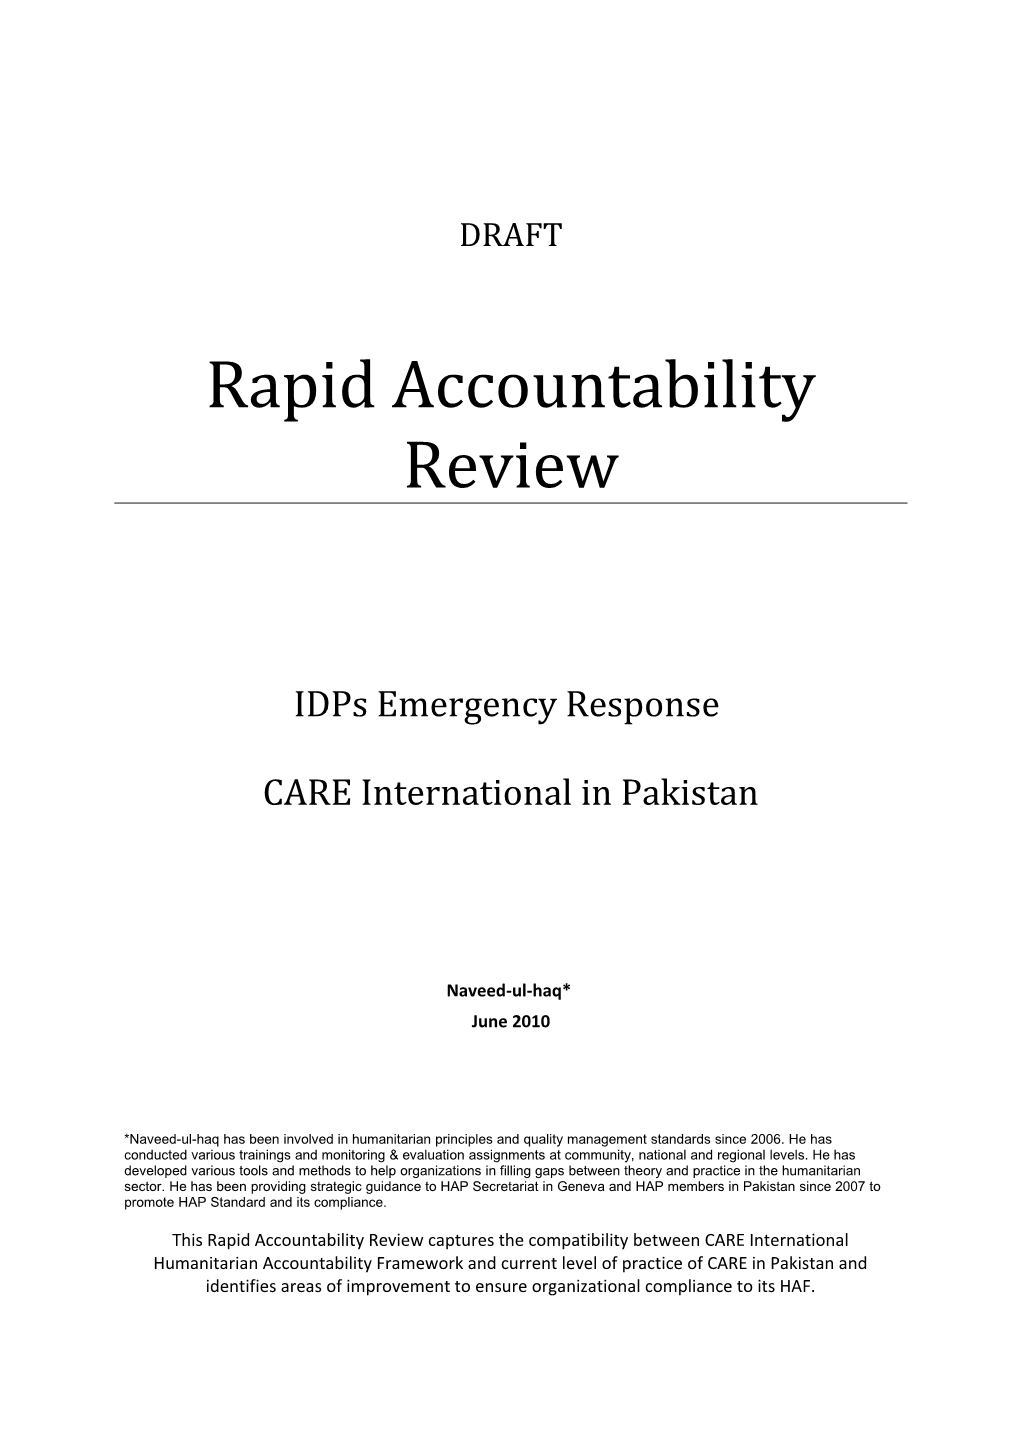 Rapid Accountability Review